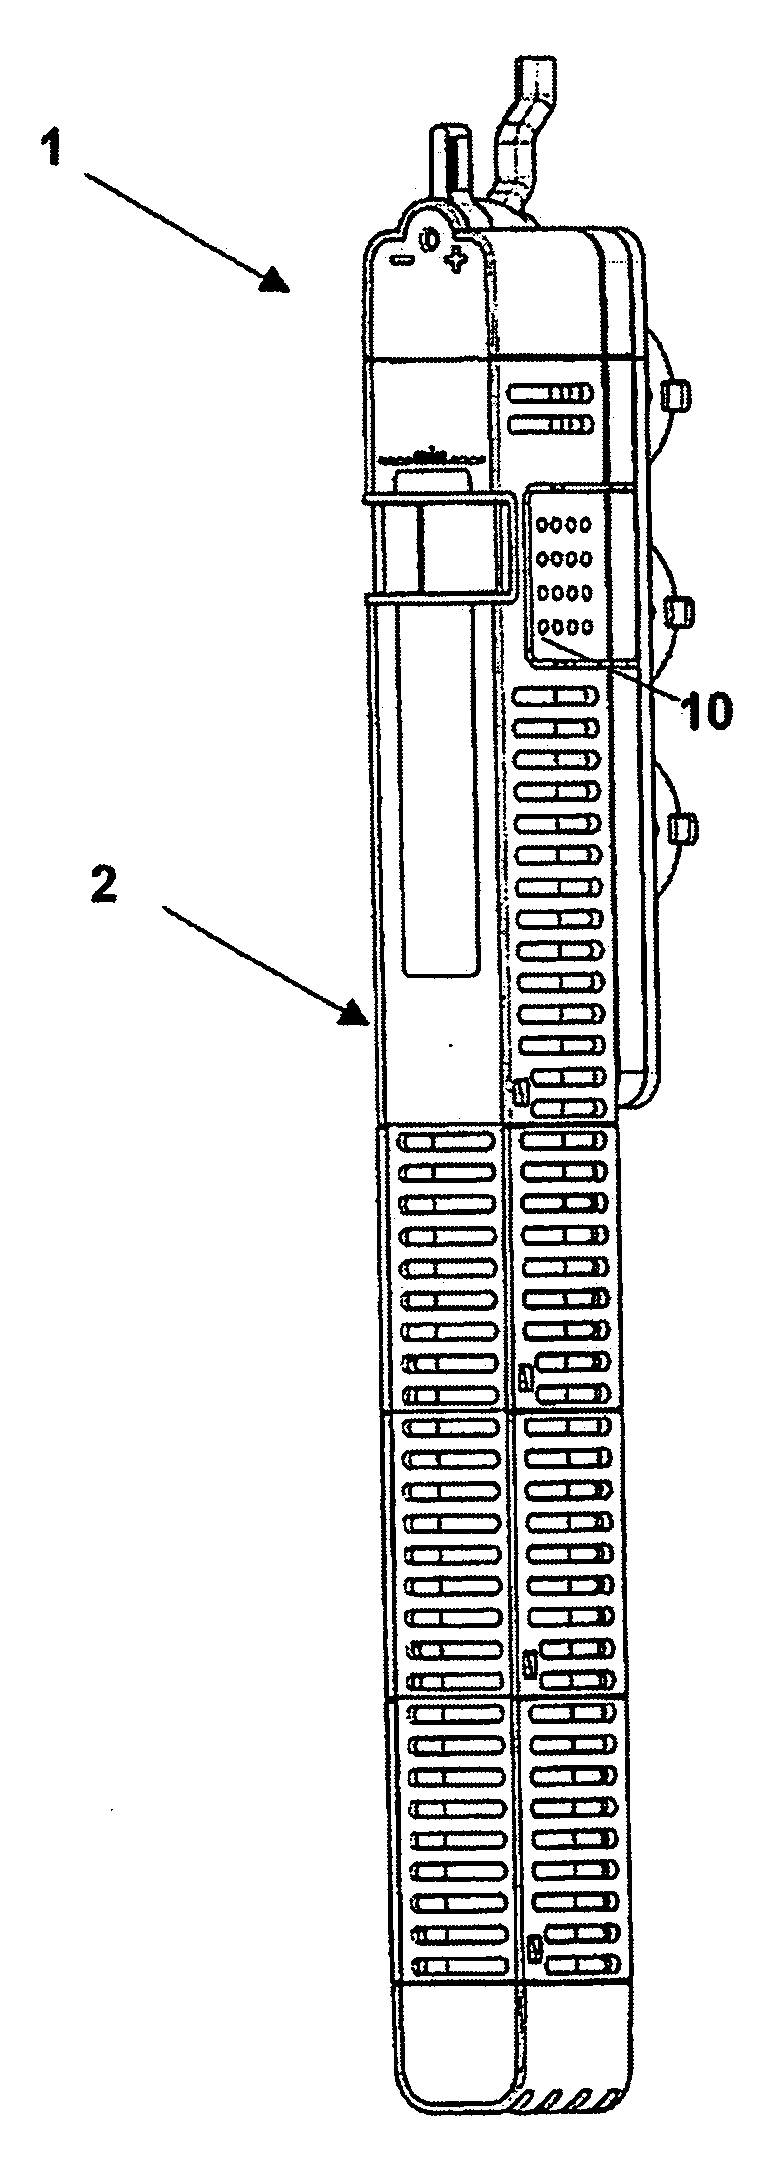 Accessory device assembly for an aquarium, particularly heater assembly